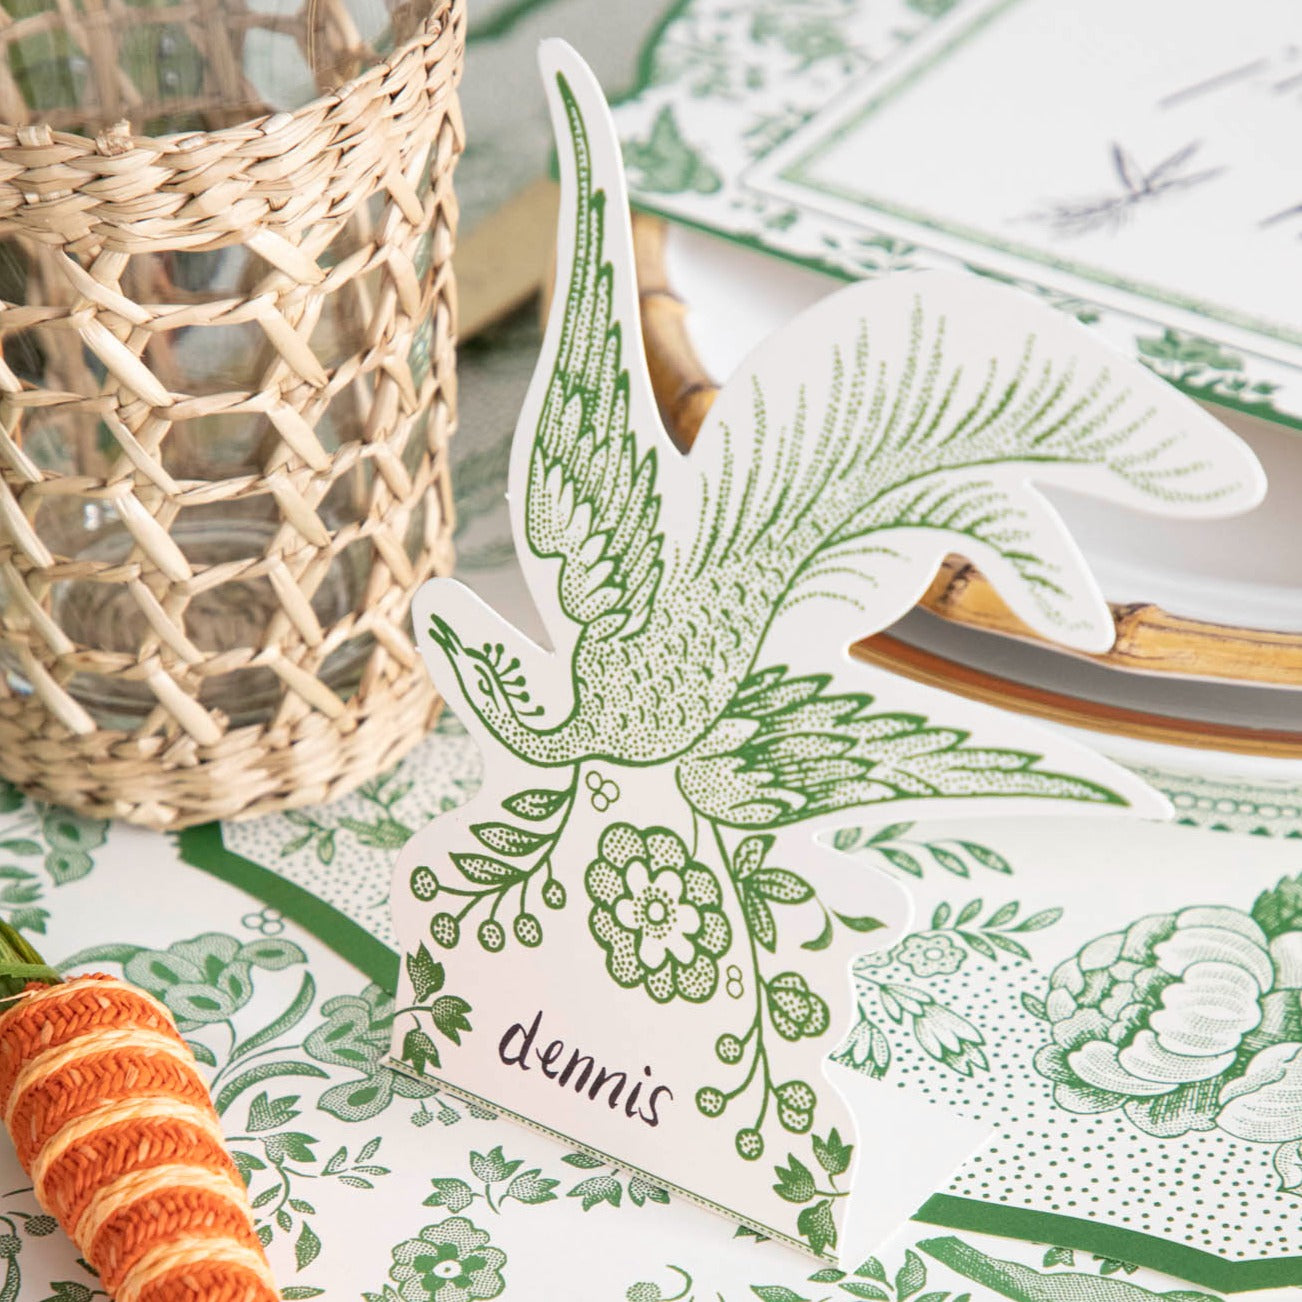 A Green Asiatic Pheasants Place Card designed by Hester &amp; Cook, featuring a bird and carrots, is placed to make guests feel welcomed.